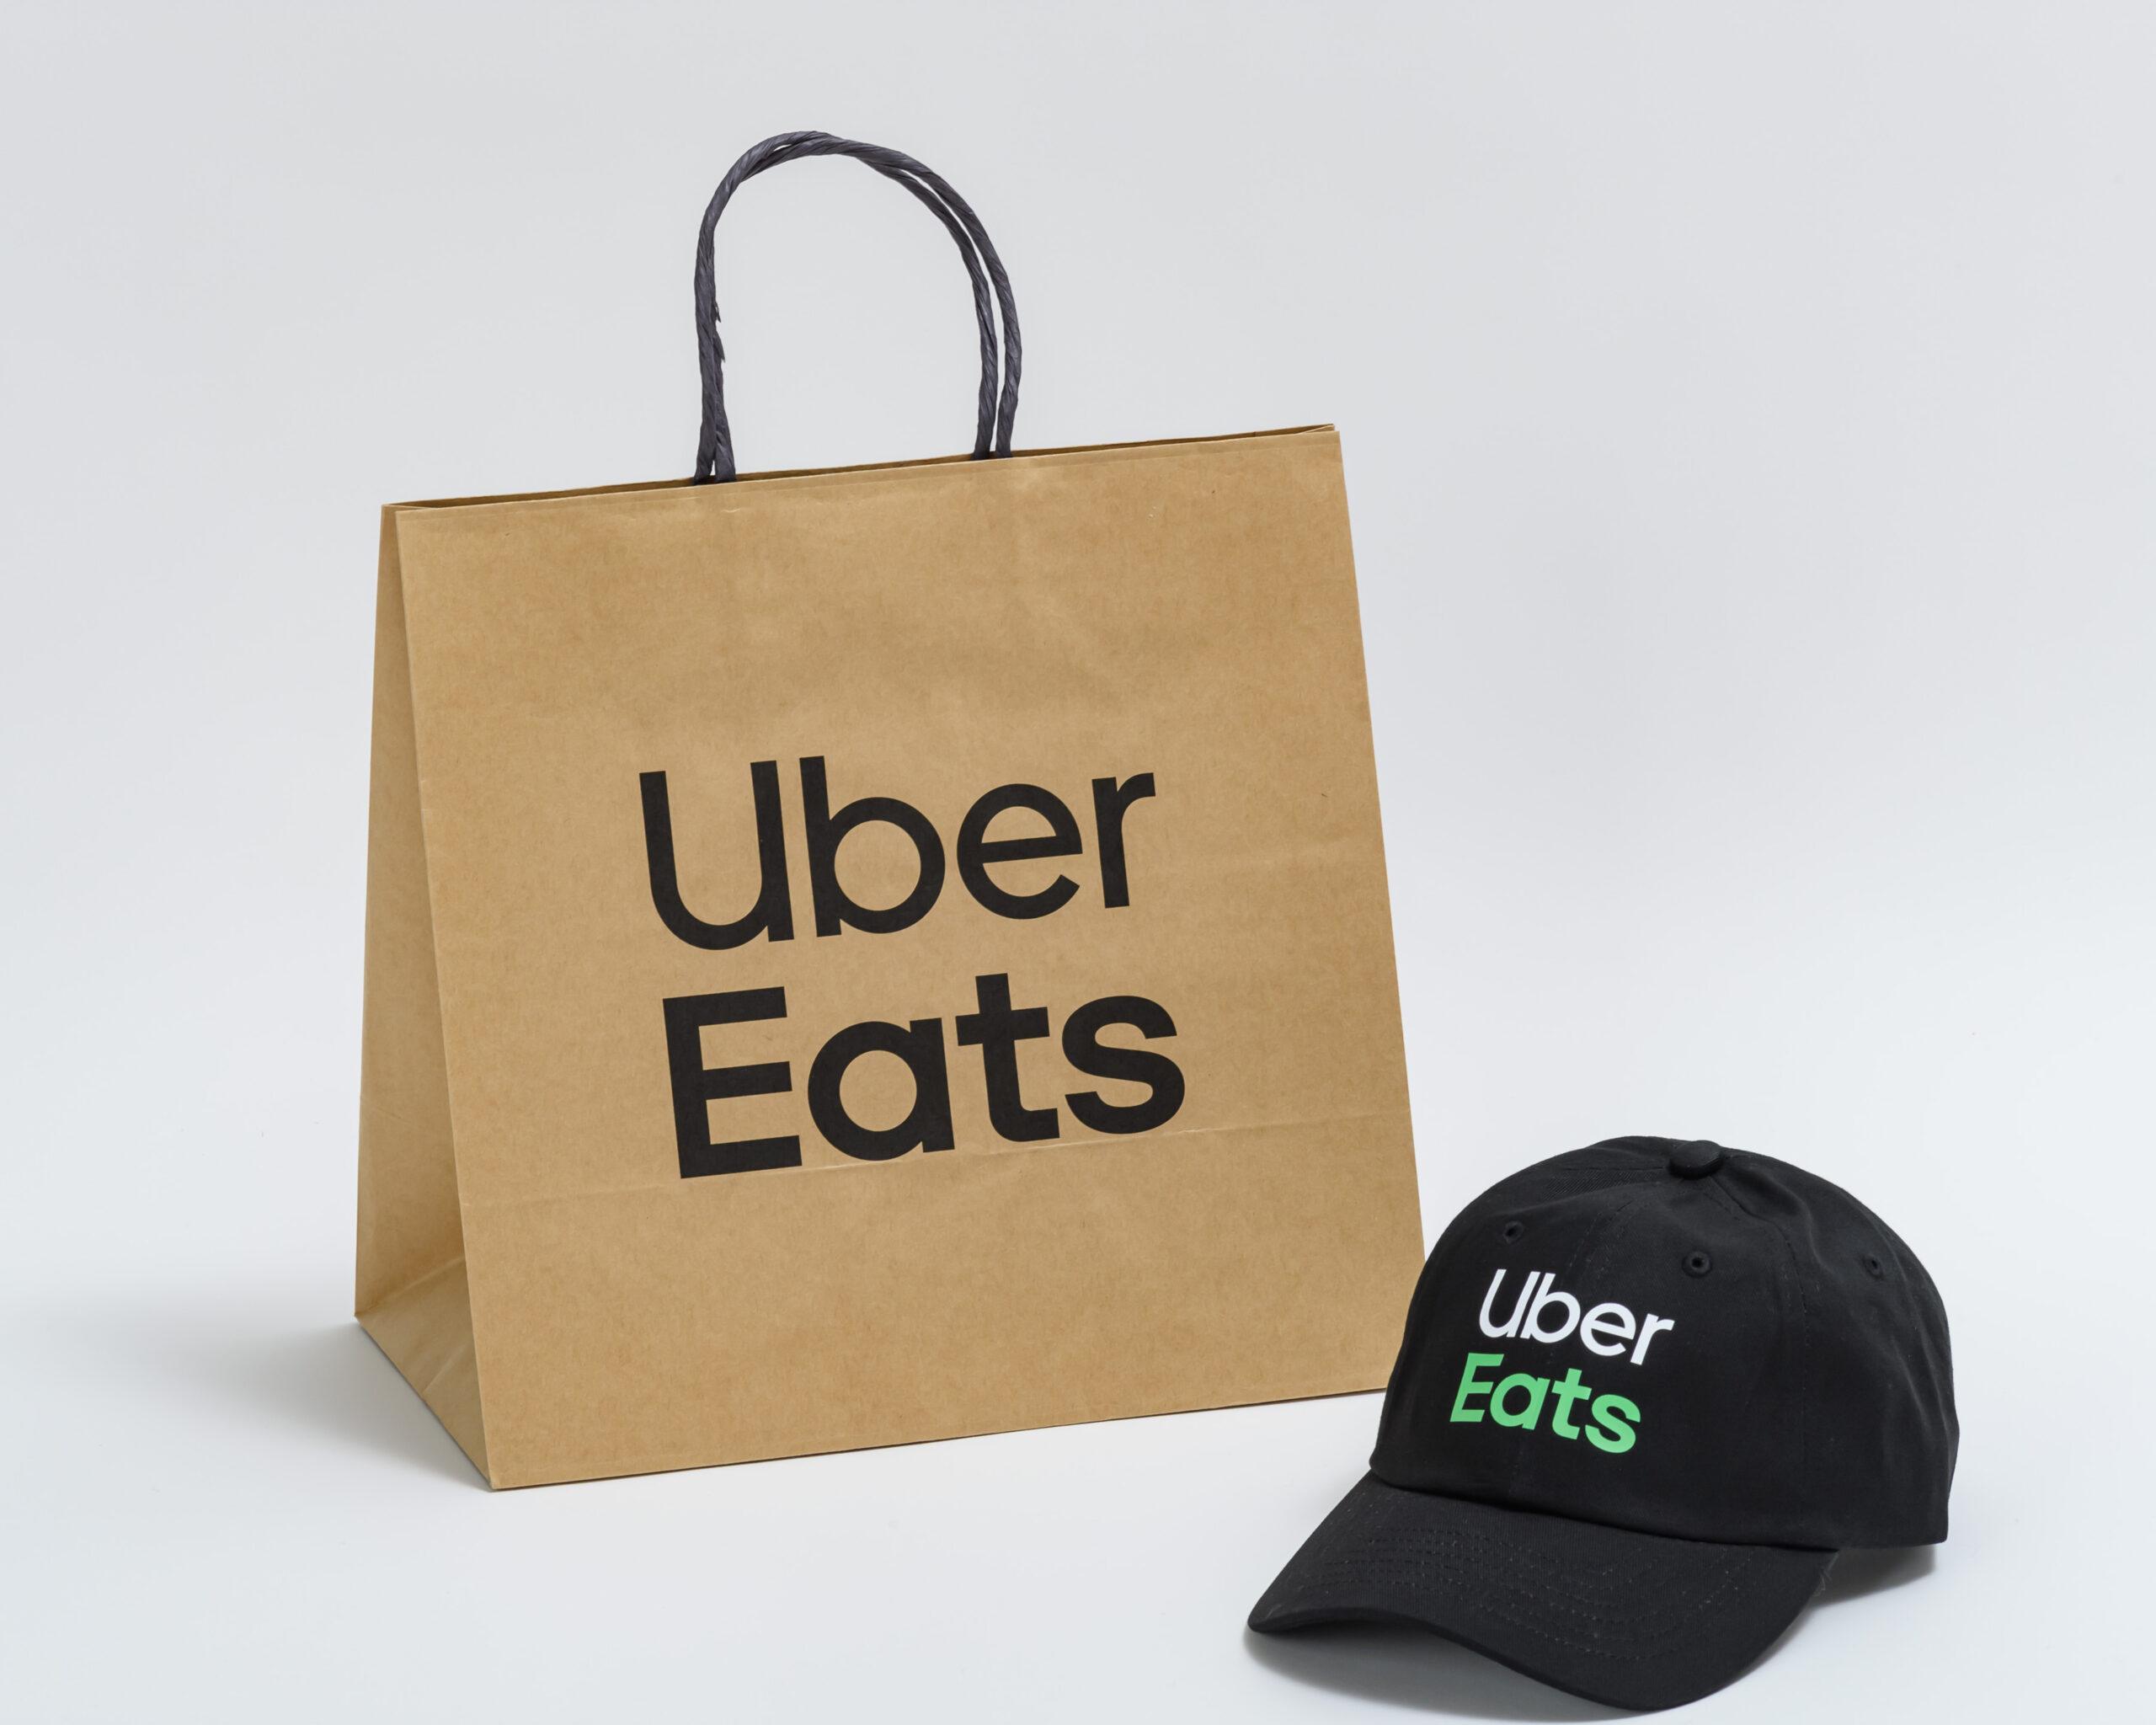 Uber Eats sends food delivery to space